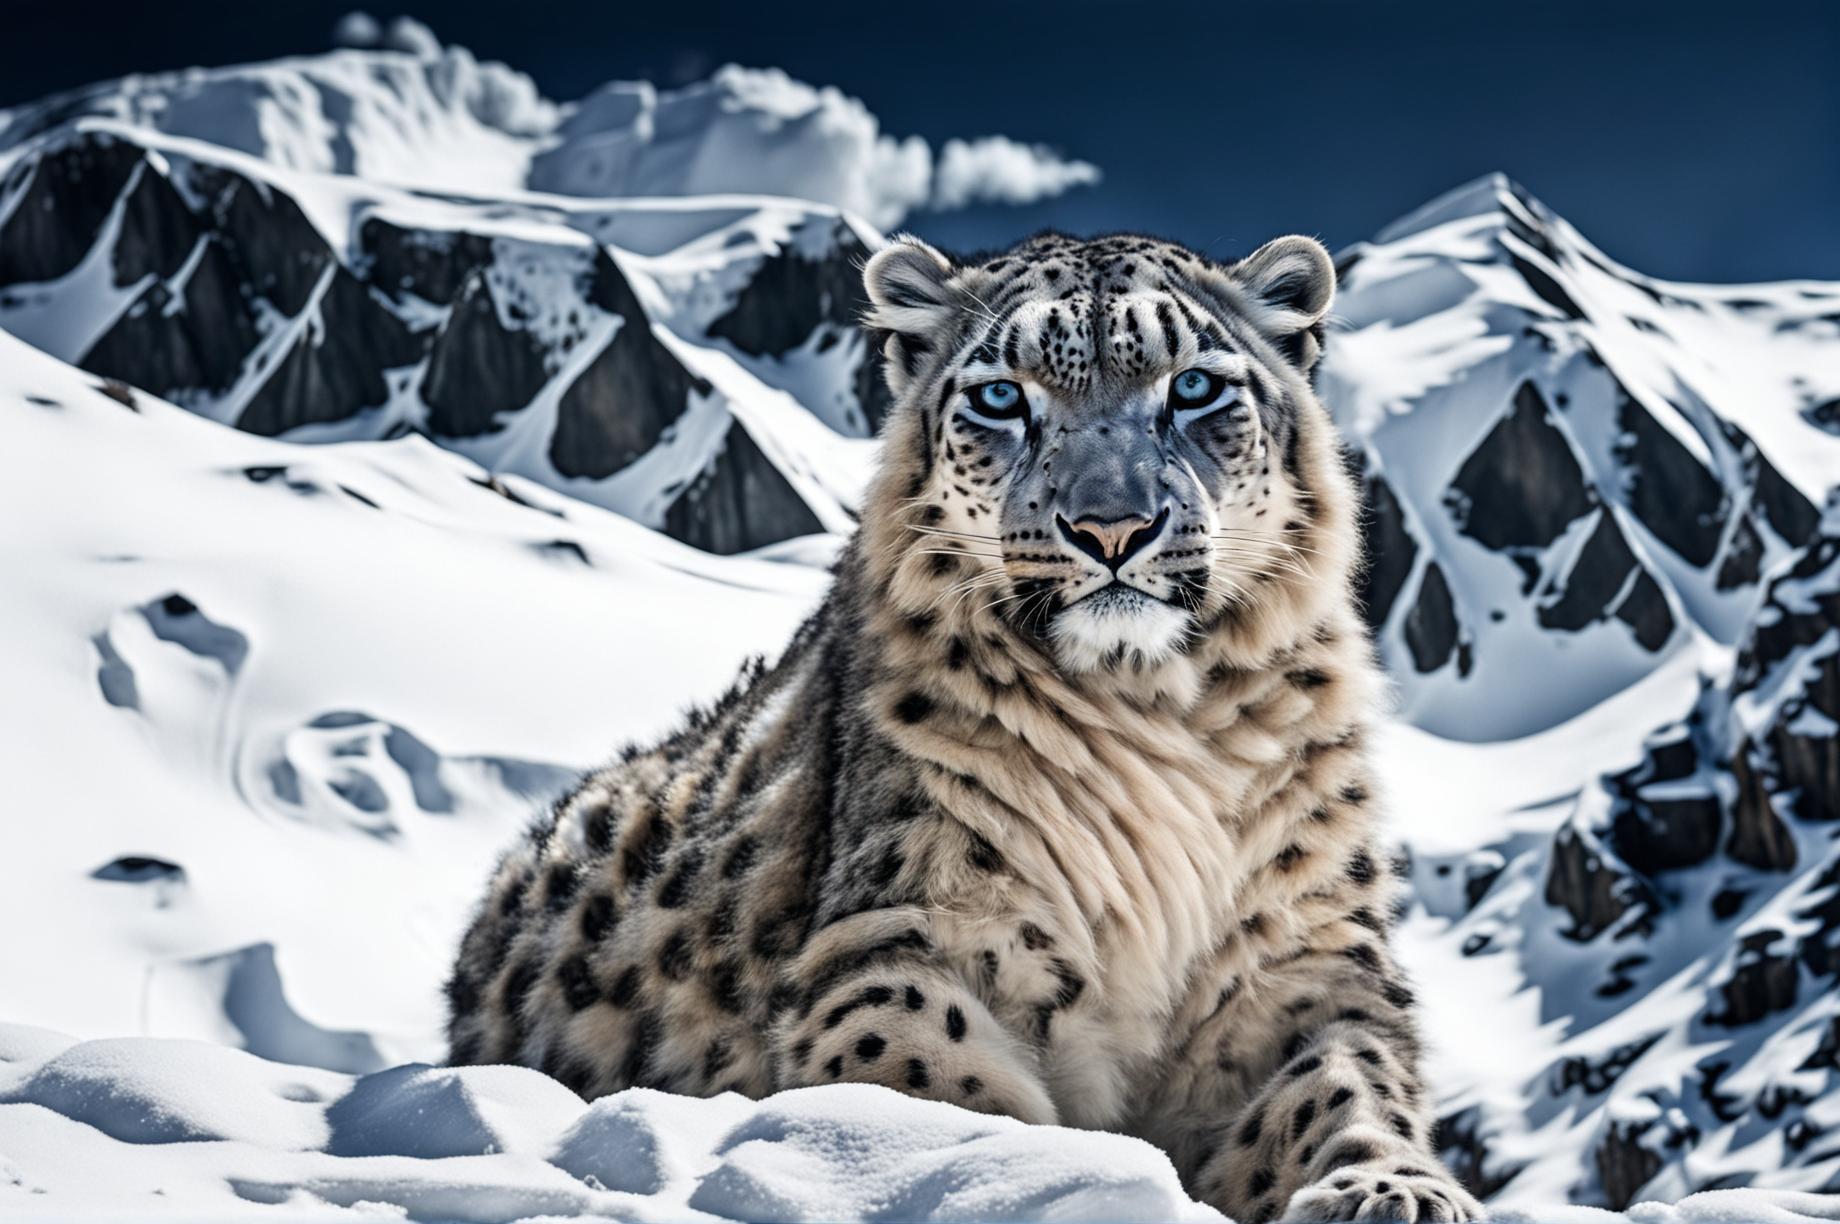 High-definition photograph of a snow leopard in a snowy mountain scene with towering peaks and a clear blue sky, designed for use as a wallpaper